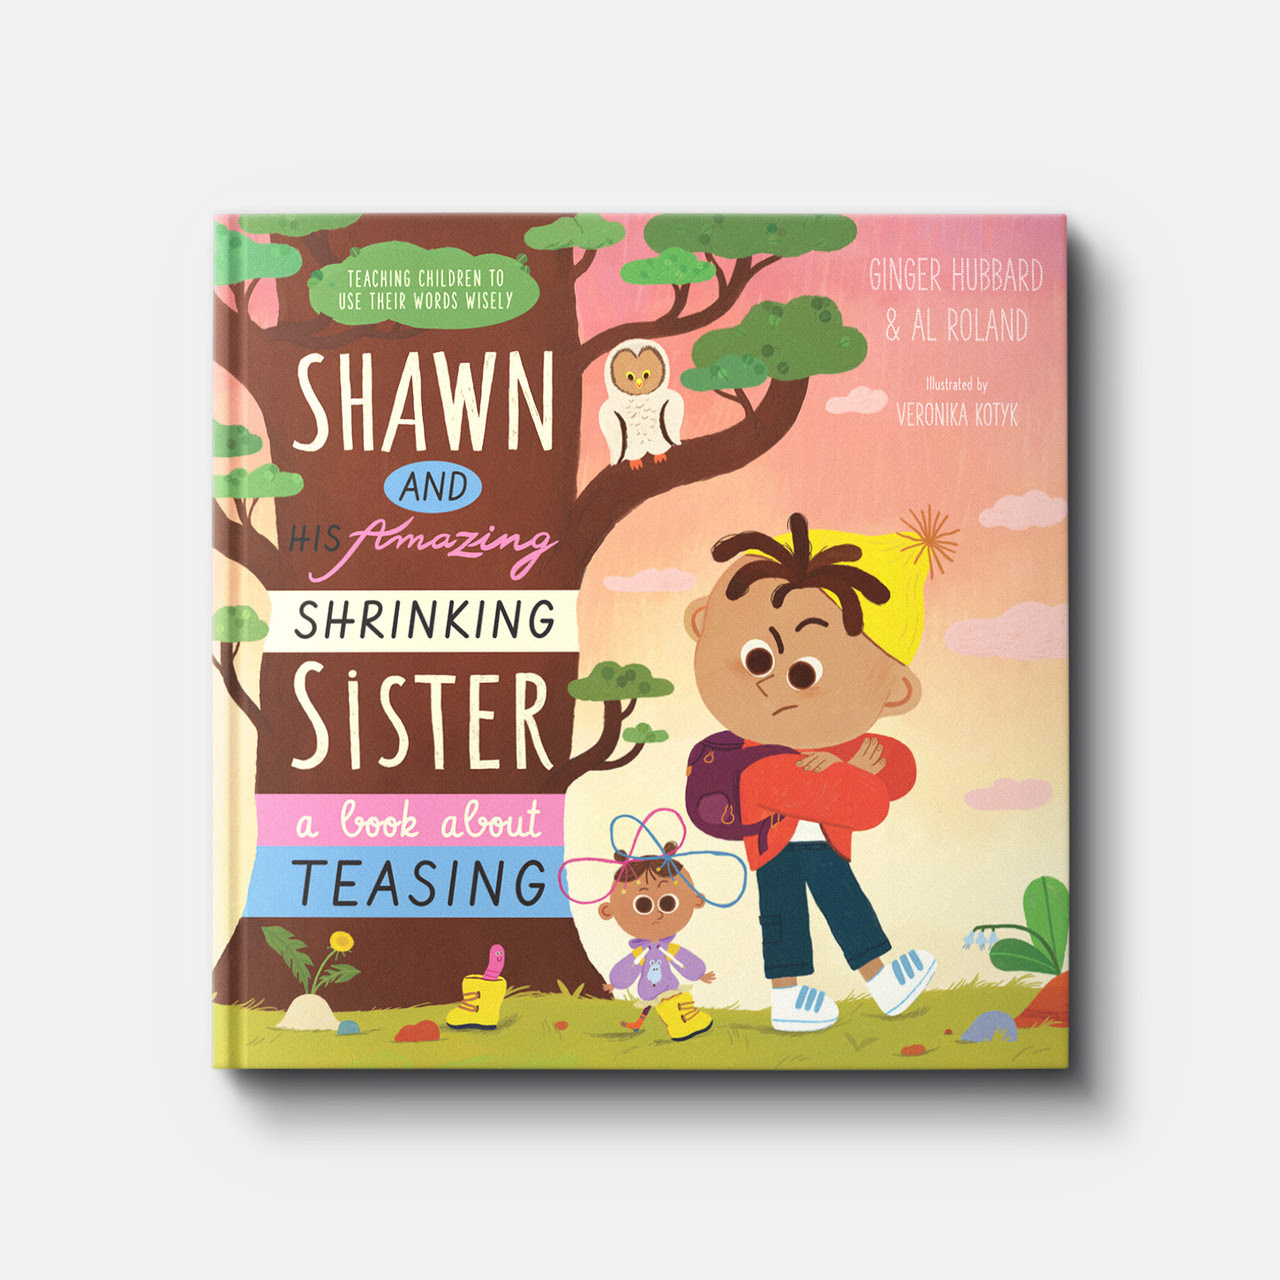 Image of Shawn and His Amazing Shrinking Sister: A Book About Teasing